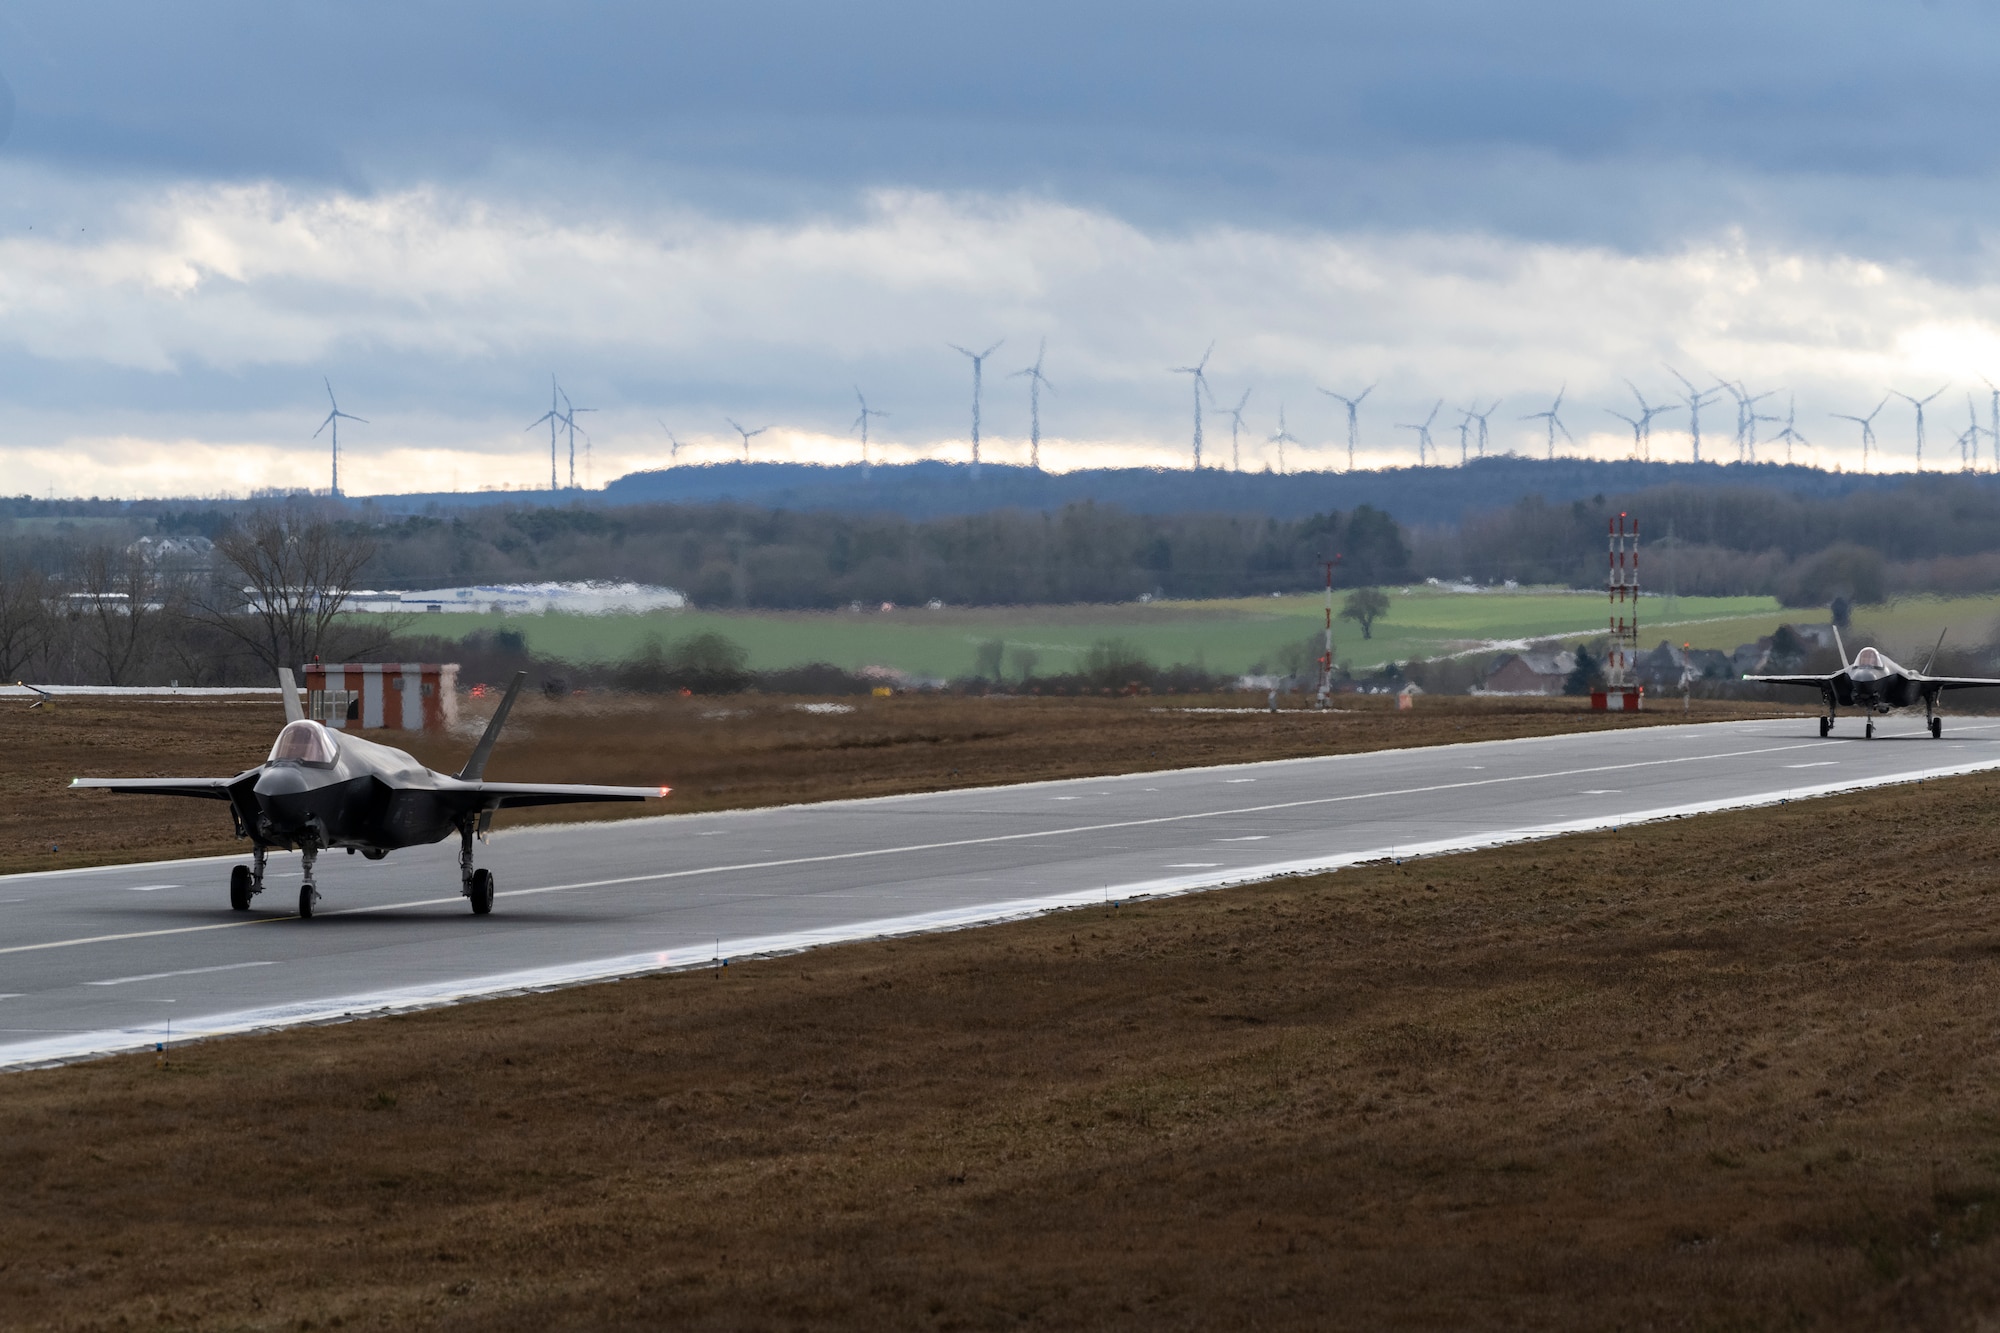 Two U.S. Air Force F-35A Lightning IIs from the 34th Fighter Squadron at Hill Air Force Base, Utah, taxi after landing at Spangdahlem Air Base, Germany, Feb. 16, 2022, to increase NATO’s collective defense posture and enhance the capabilities of regional partners and allies.